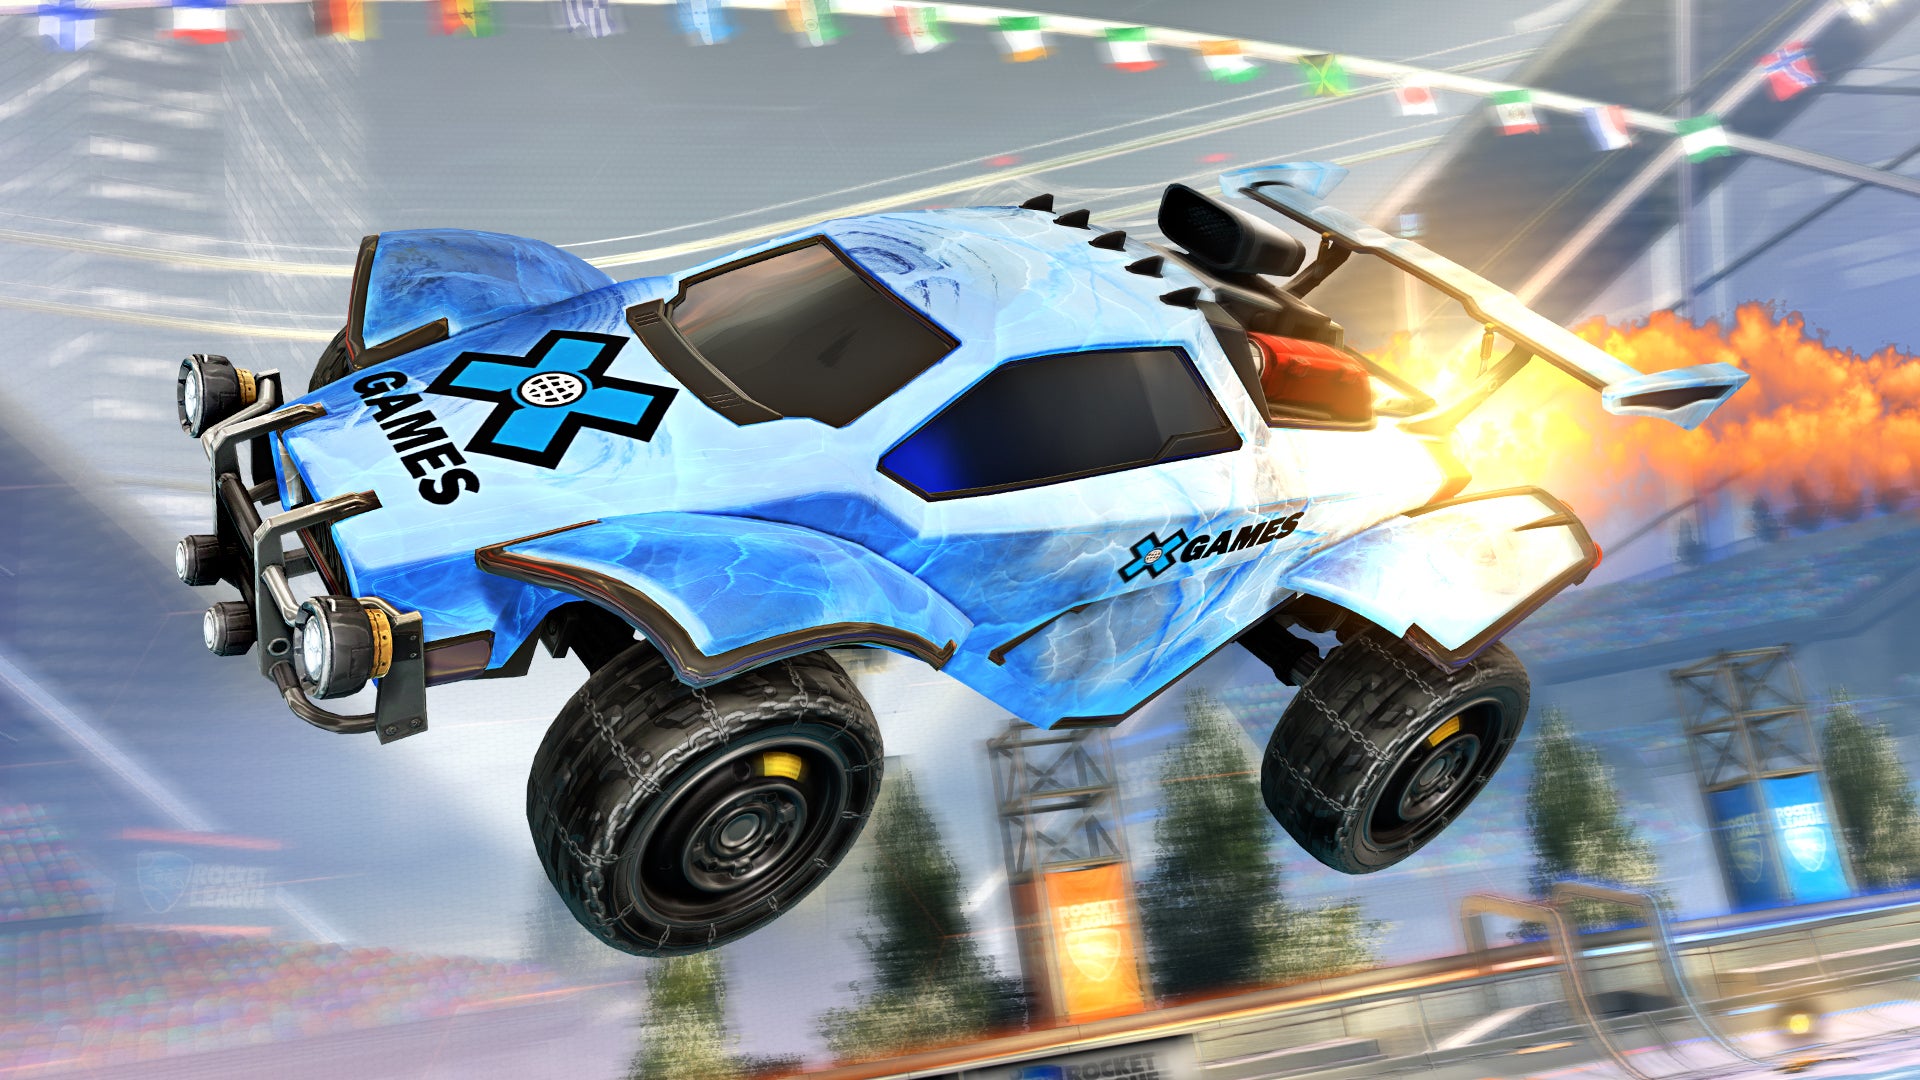 Rocket League Is Teaming Up With X Games